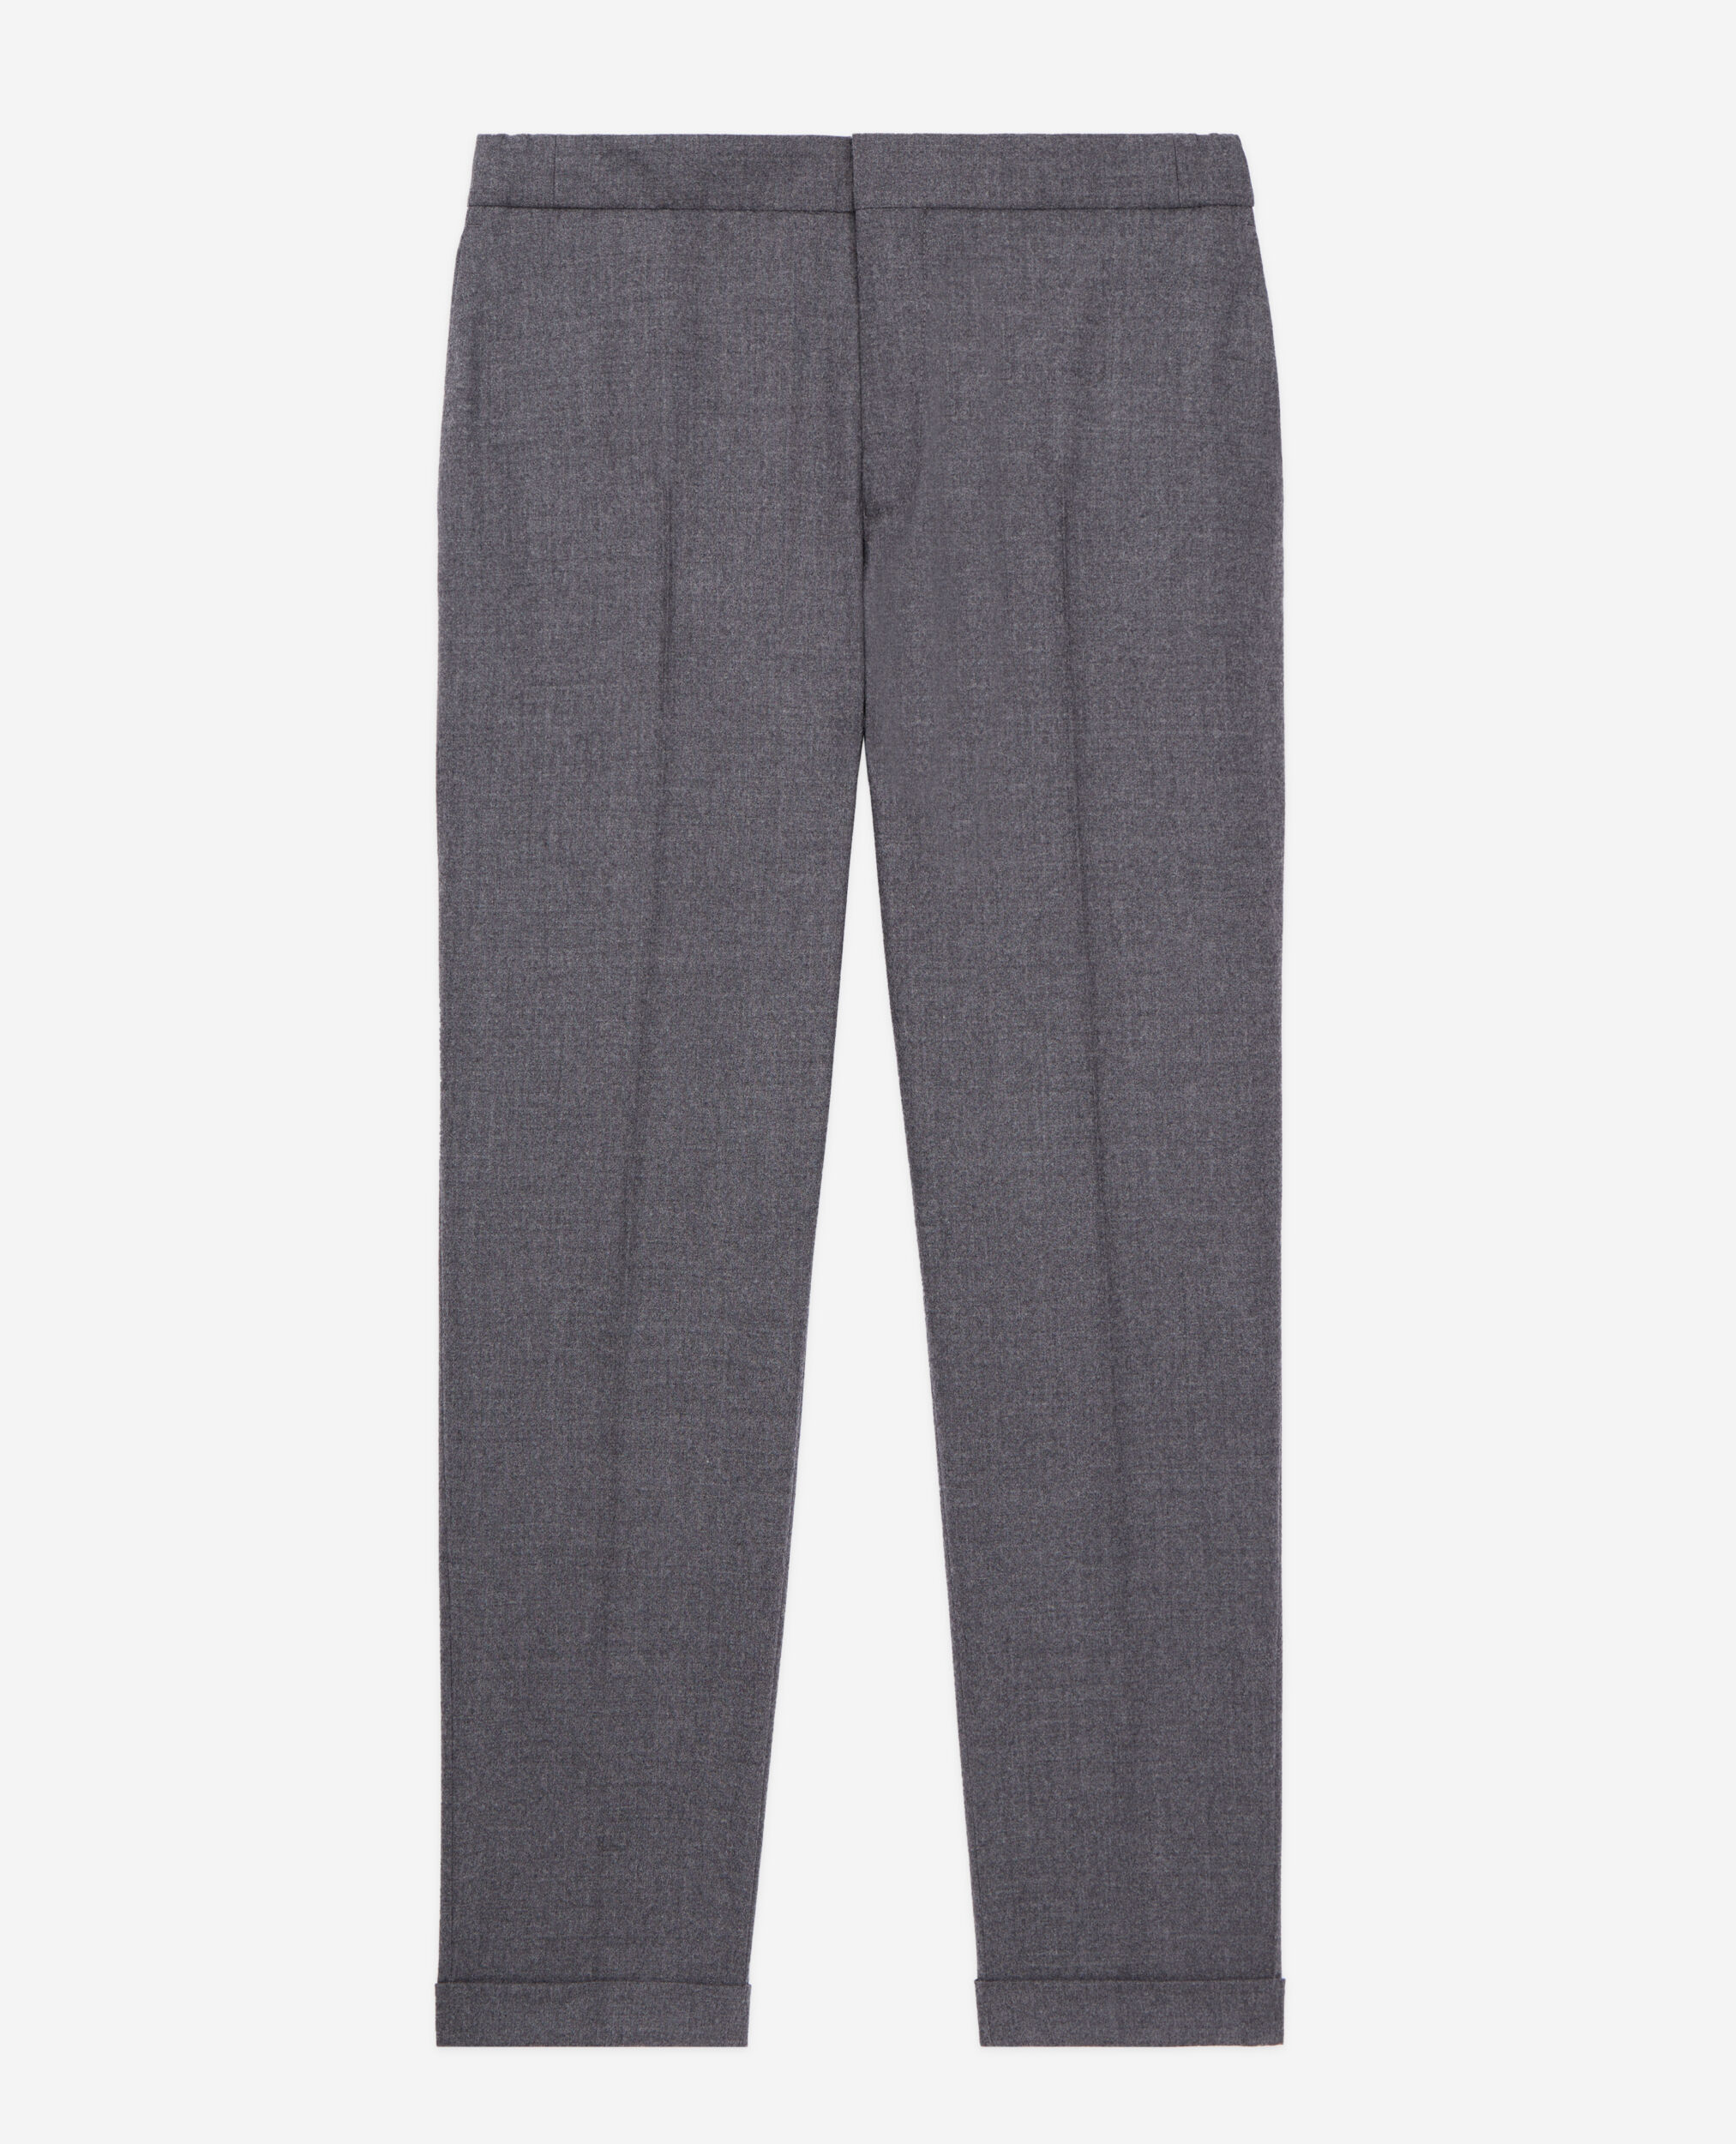 Grey flannel trousers, GREY, hi-res image number null